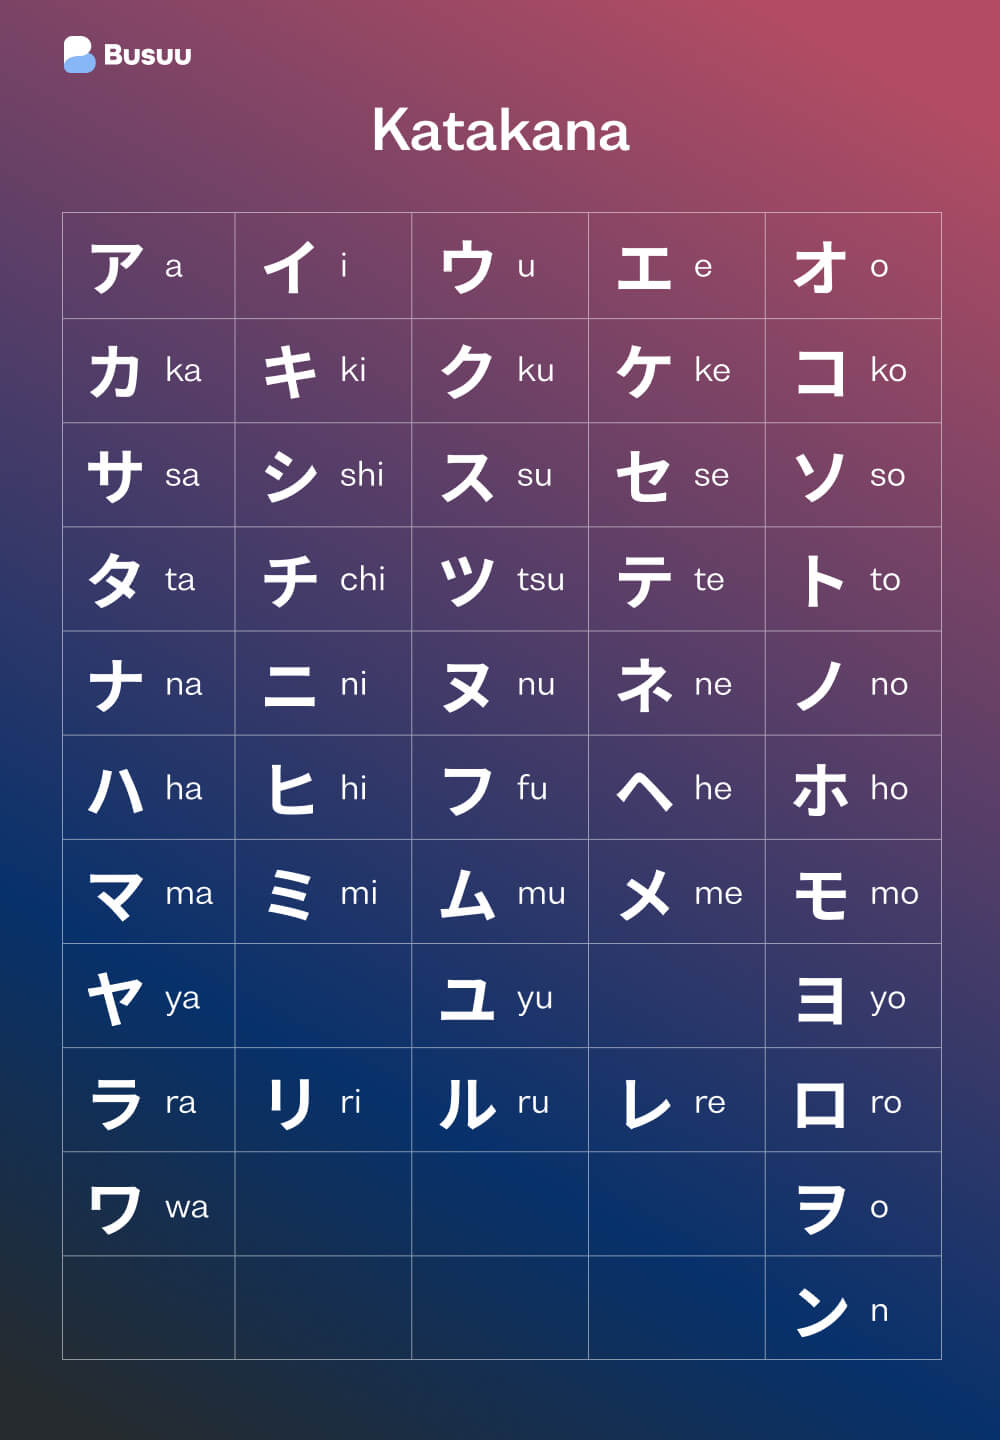 Japanese Symbols And Their Meanings In English